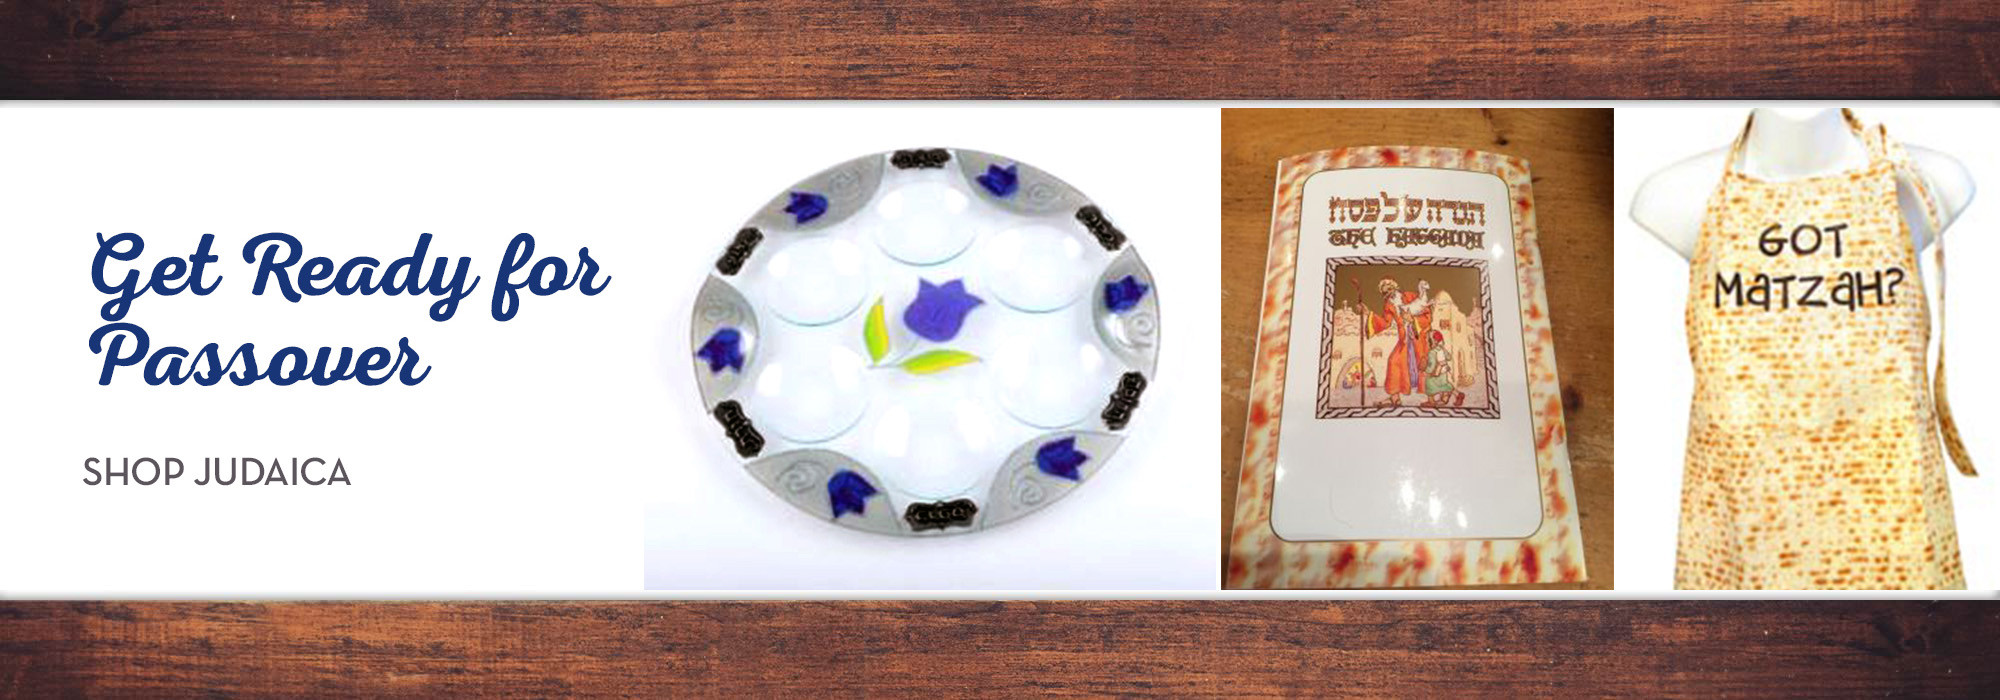 Passover Gifts Ideas
 2910 on the Square wonderful t ideas ts for any